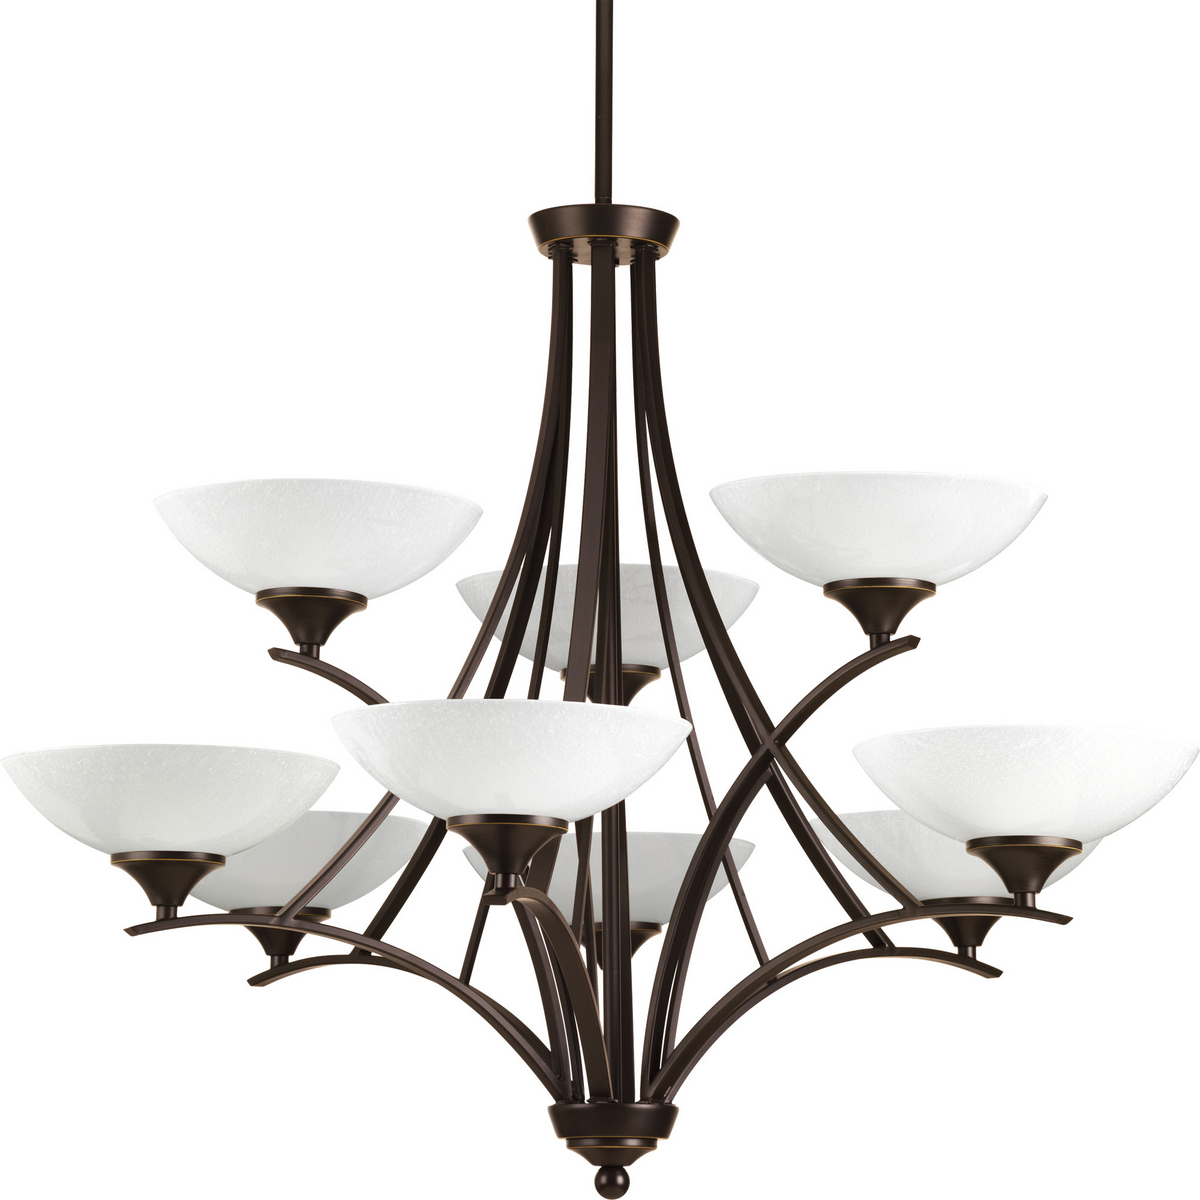 Nine-light, two-tier chandelier with polished seeded glass etched inside is inspired by modern graphic design providing artful details to enhance visual space.